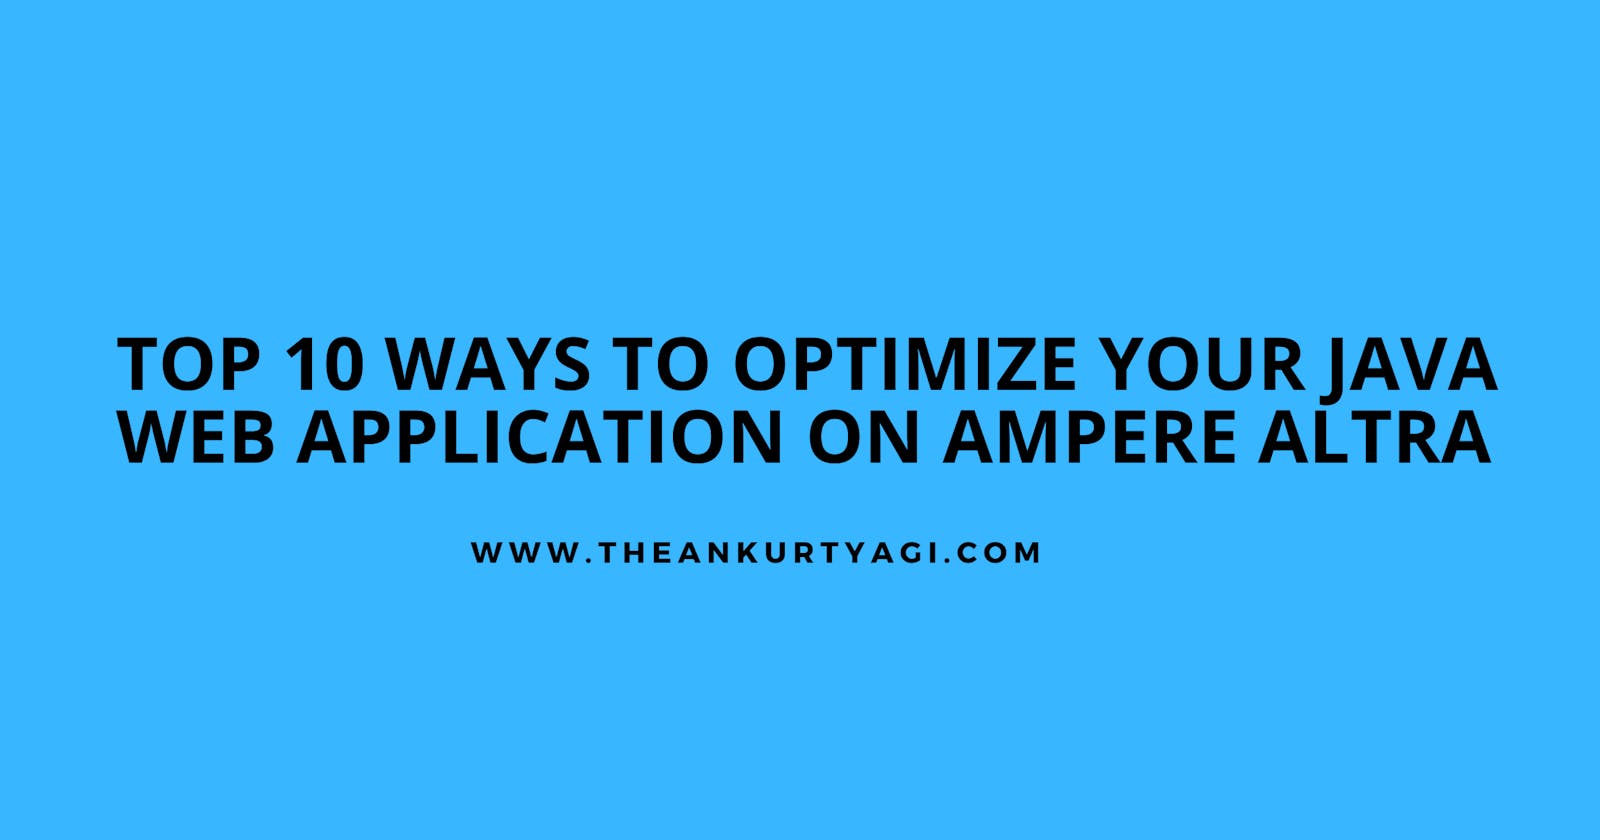 Top 10 Ways to Optimize Your Java Web Application on Ampere Altra